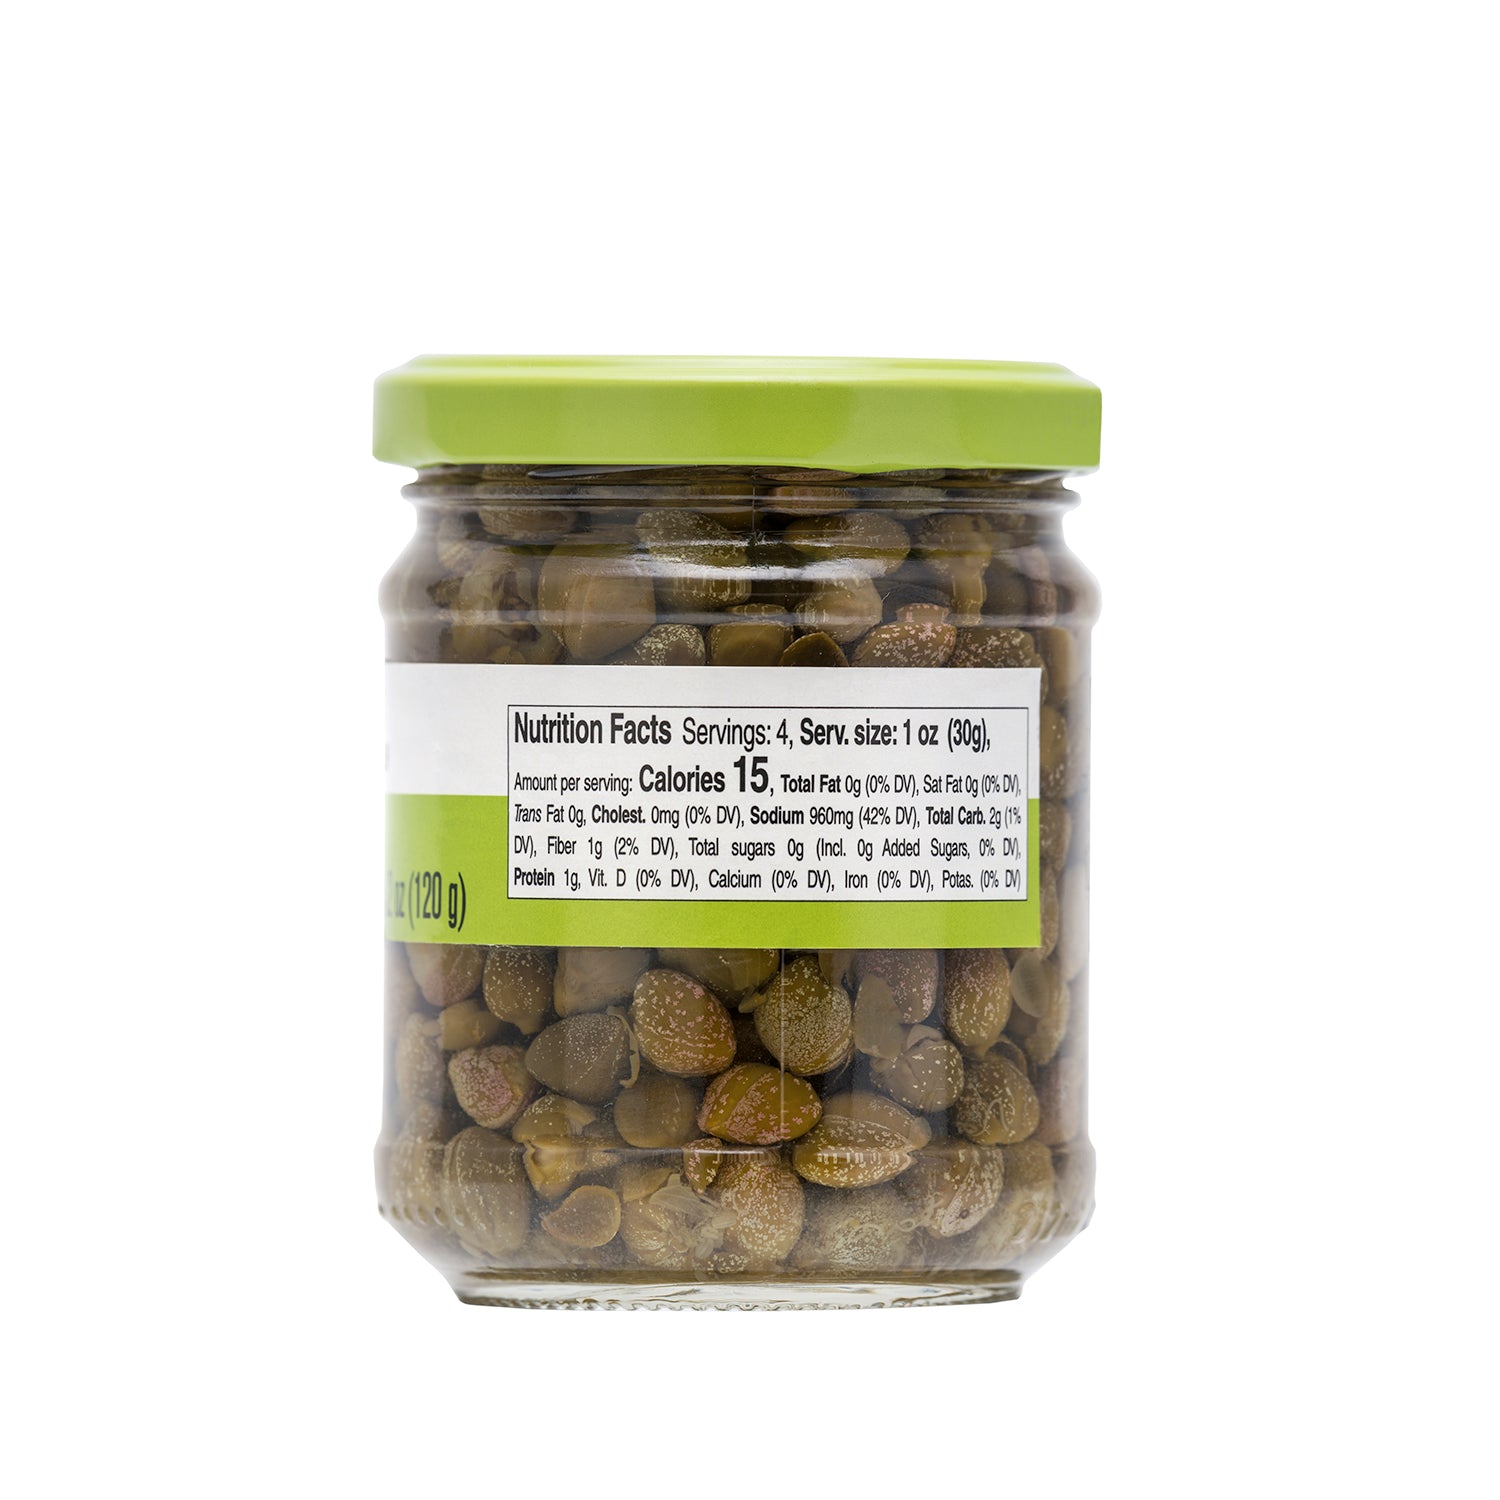 Fratelli D'Amico, Capers, 9, Italian Capers in Brine, Jar, 7.1 oz (200g), Product of Italy